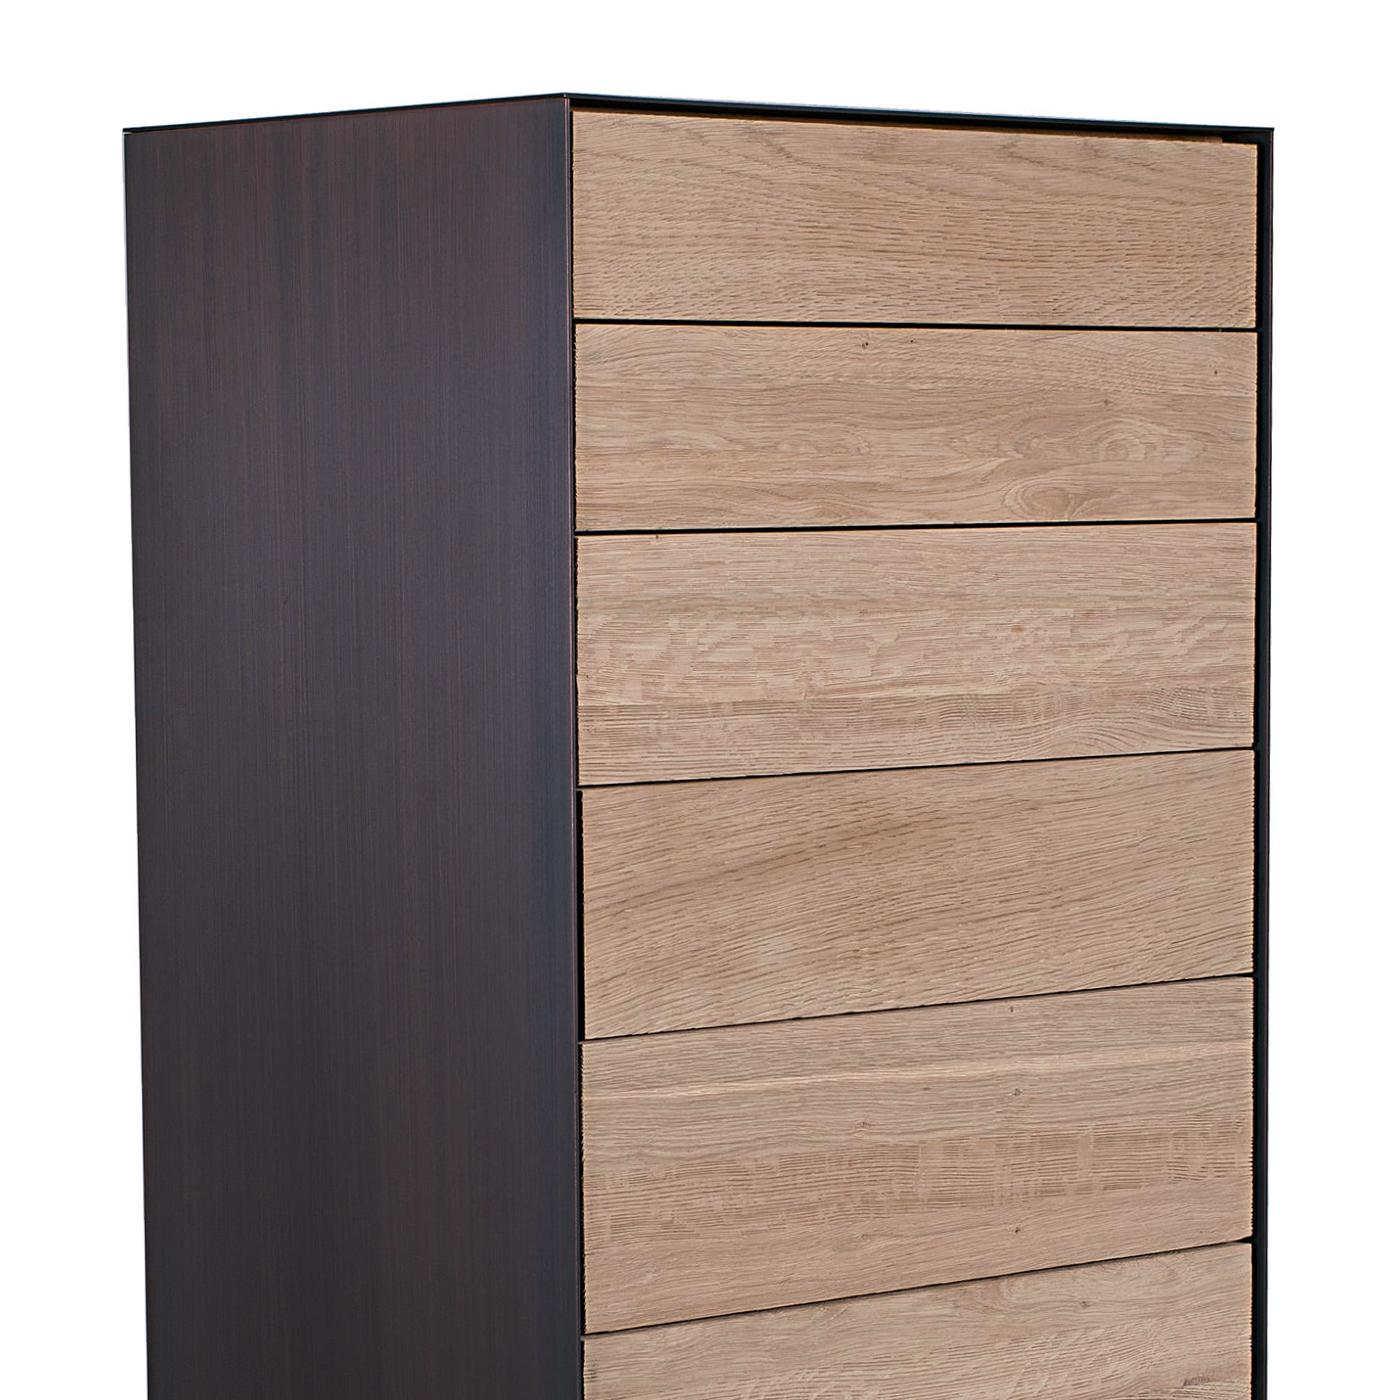 Chest of drawers trendy oak with 7 drawers in solid oak wood,
drawers with easy glide system on metal runners. Chest top, sides. 
and base in lacquered iron. Chest back in oak wood.
Also available with dawers in solid walnut wood on request,